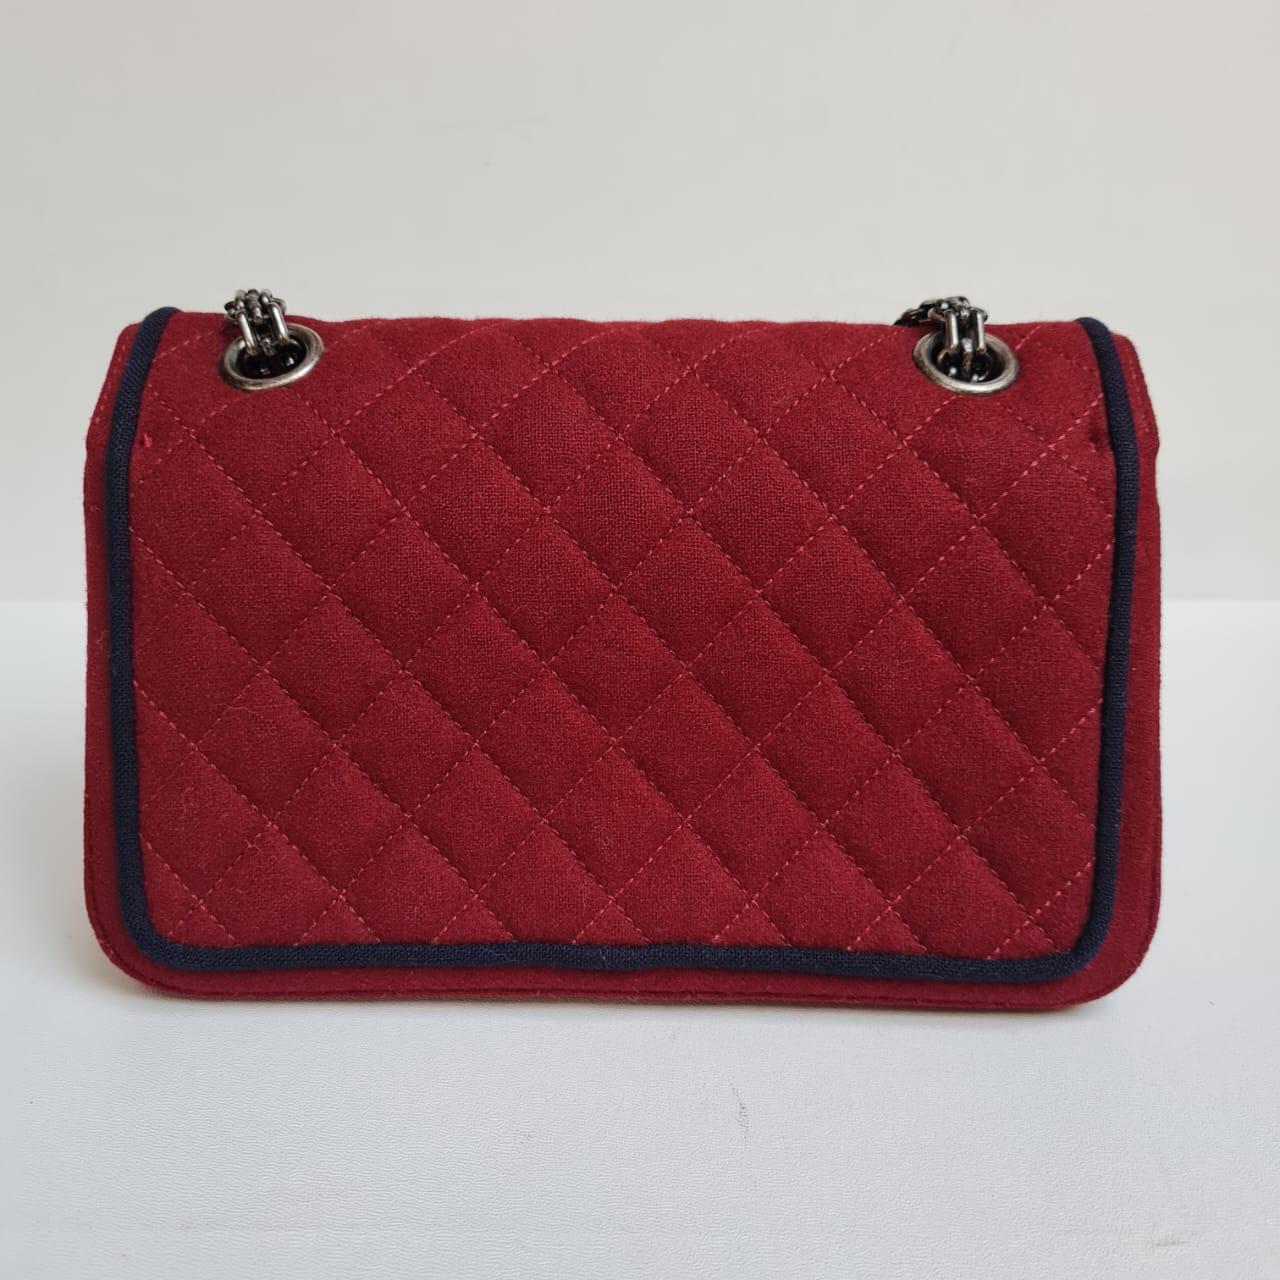 Chanel 2015 Red Edelweiss Reissue Wool Flap Bag For Sale 2